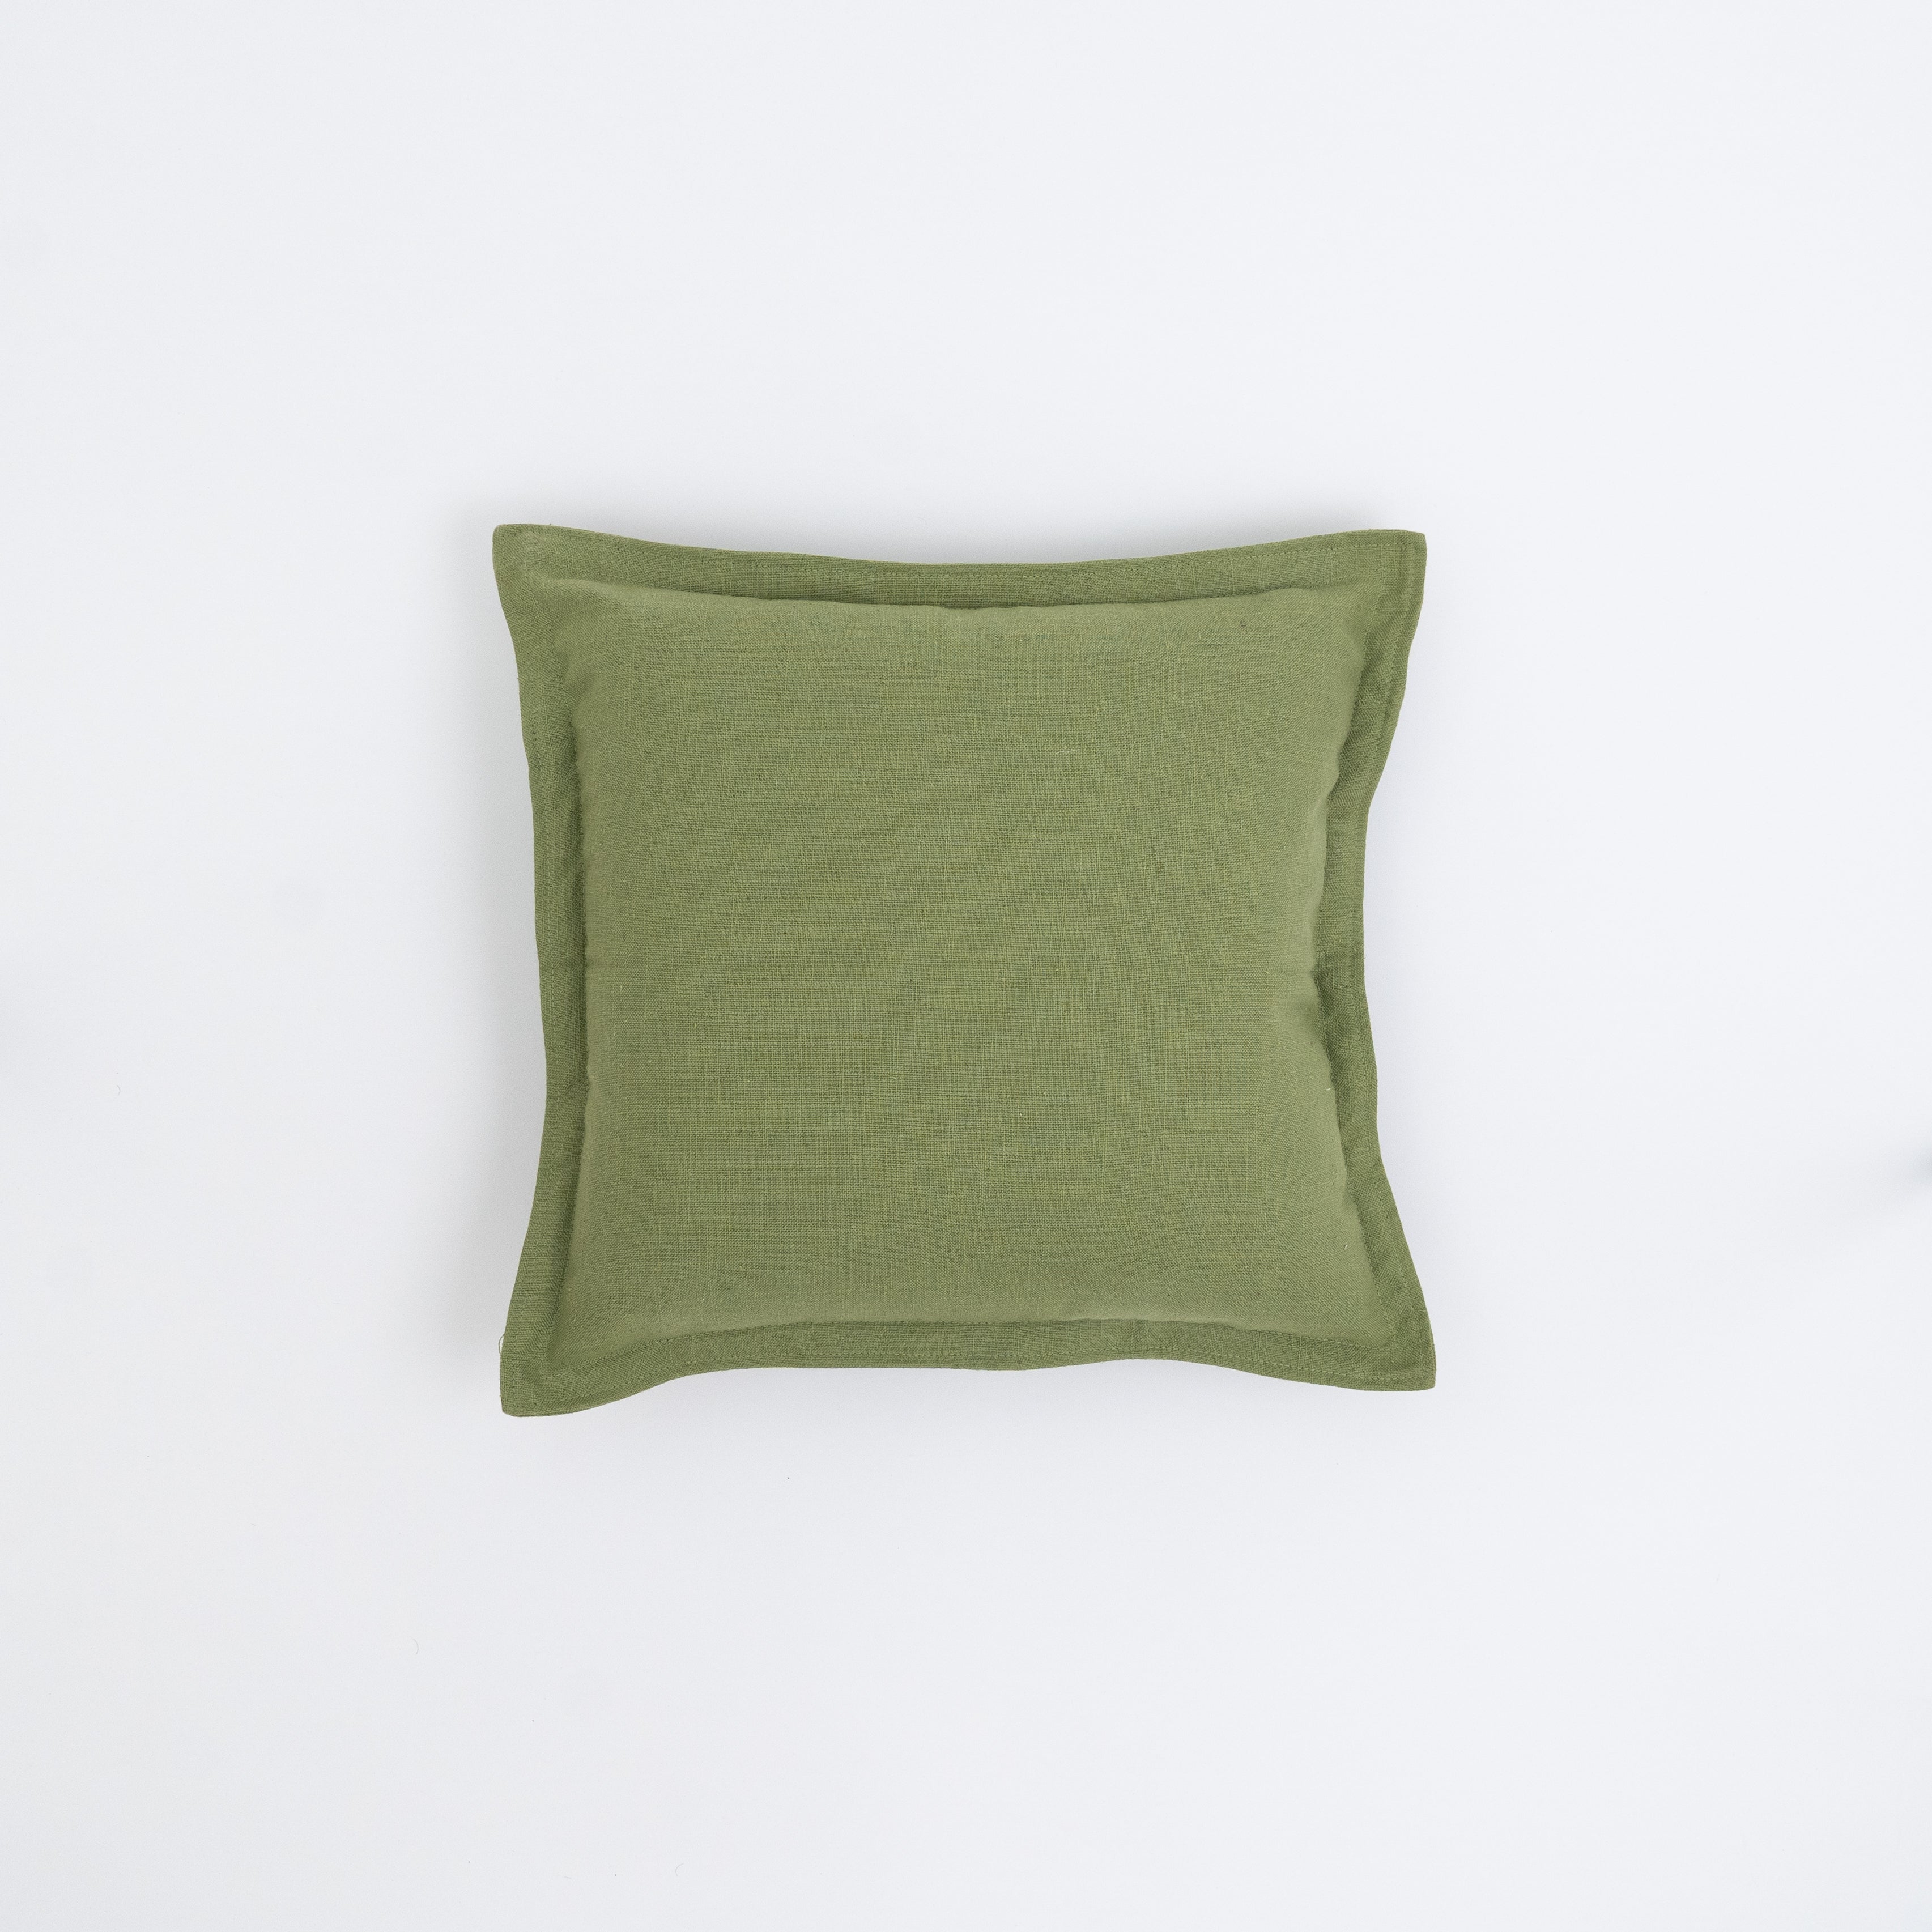 Cushion Cover Green 45 x45cm - Wood and Steel Furnitures